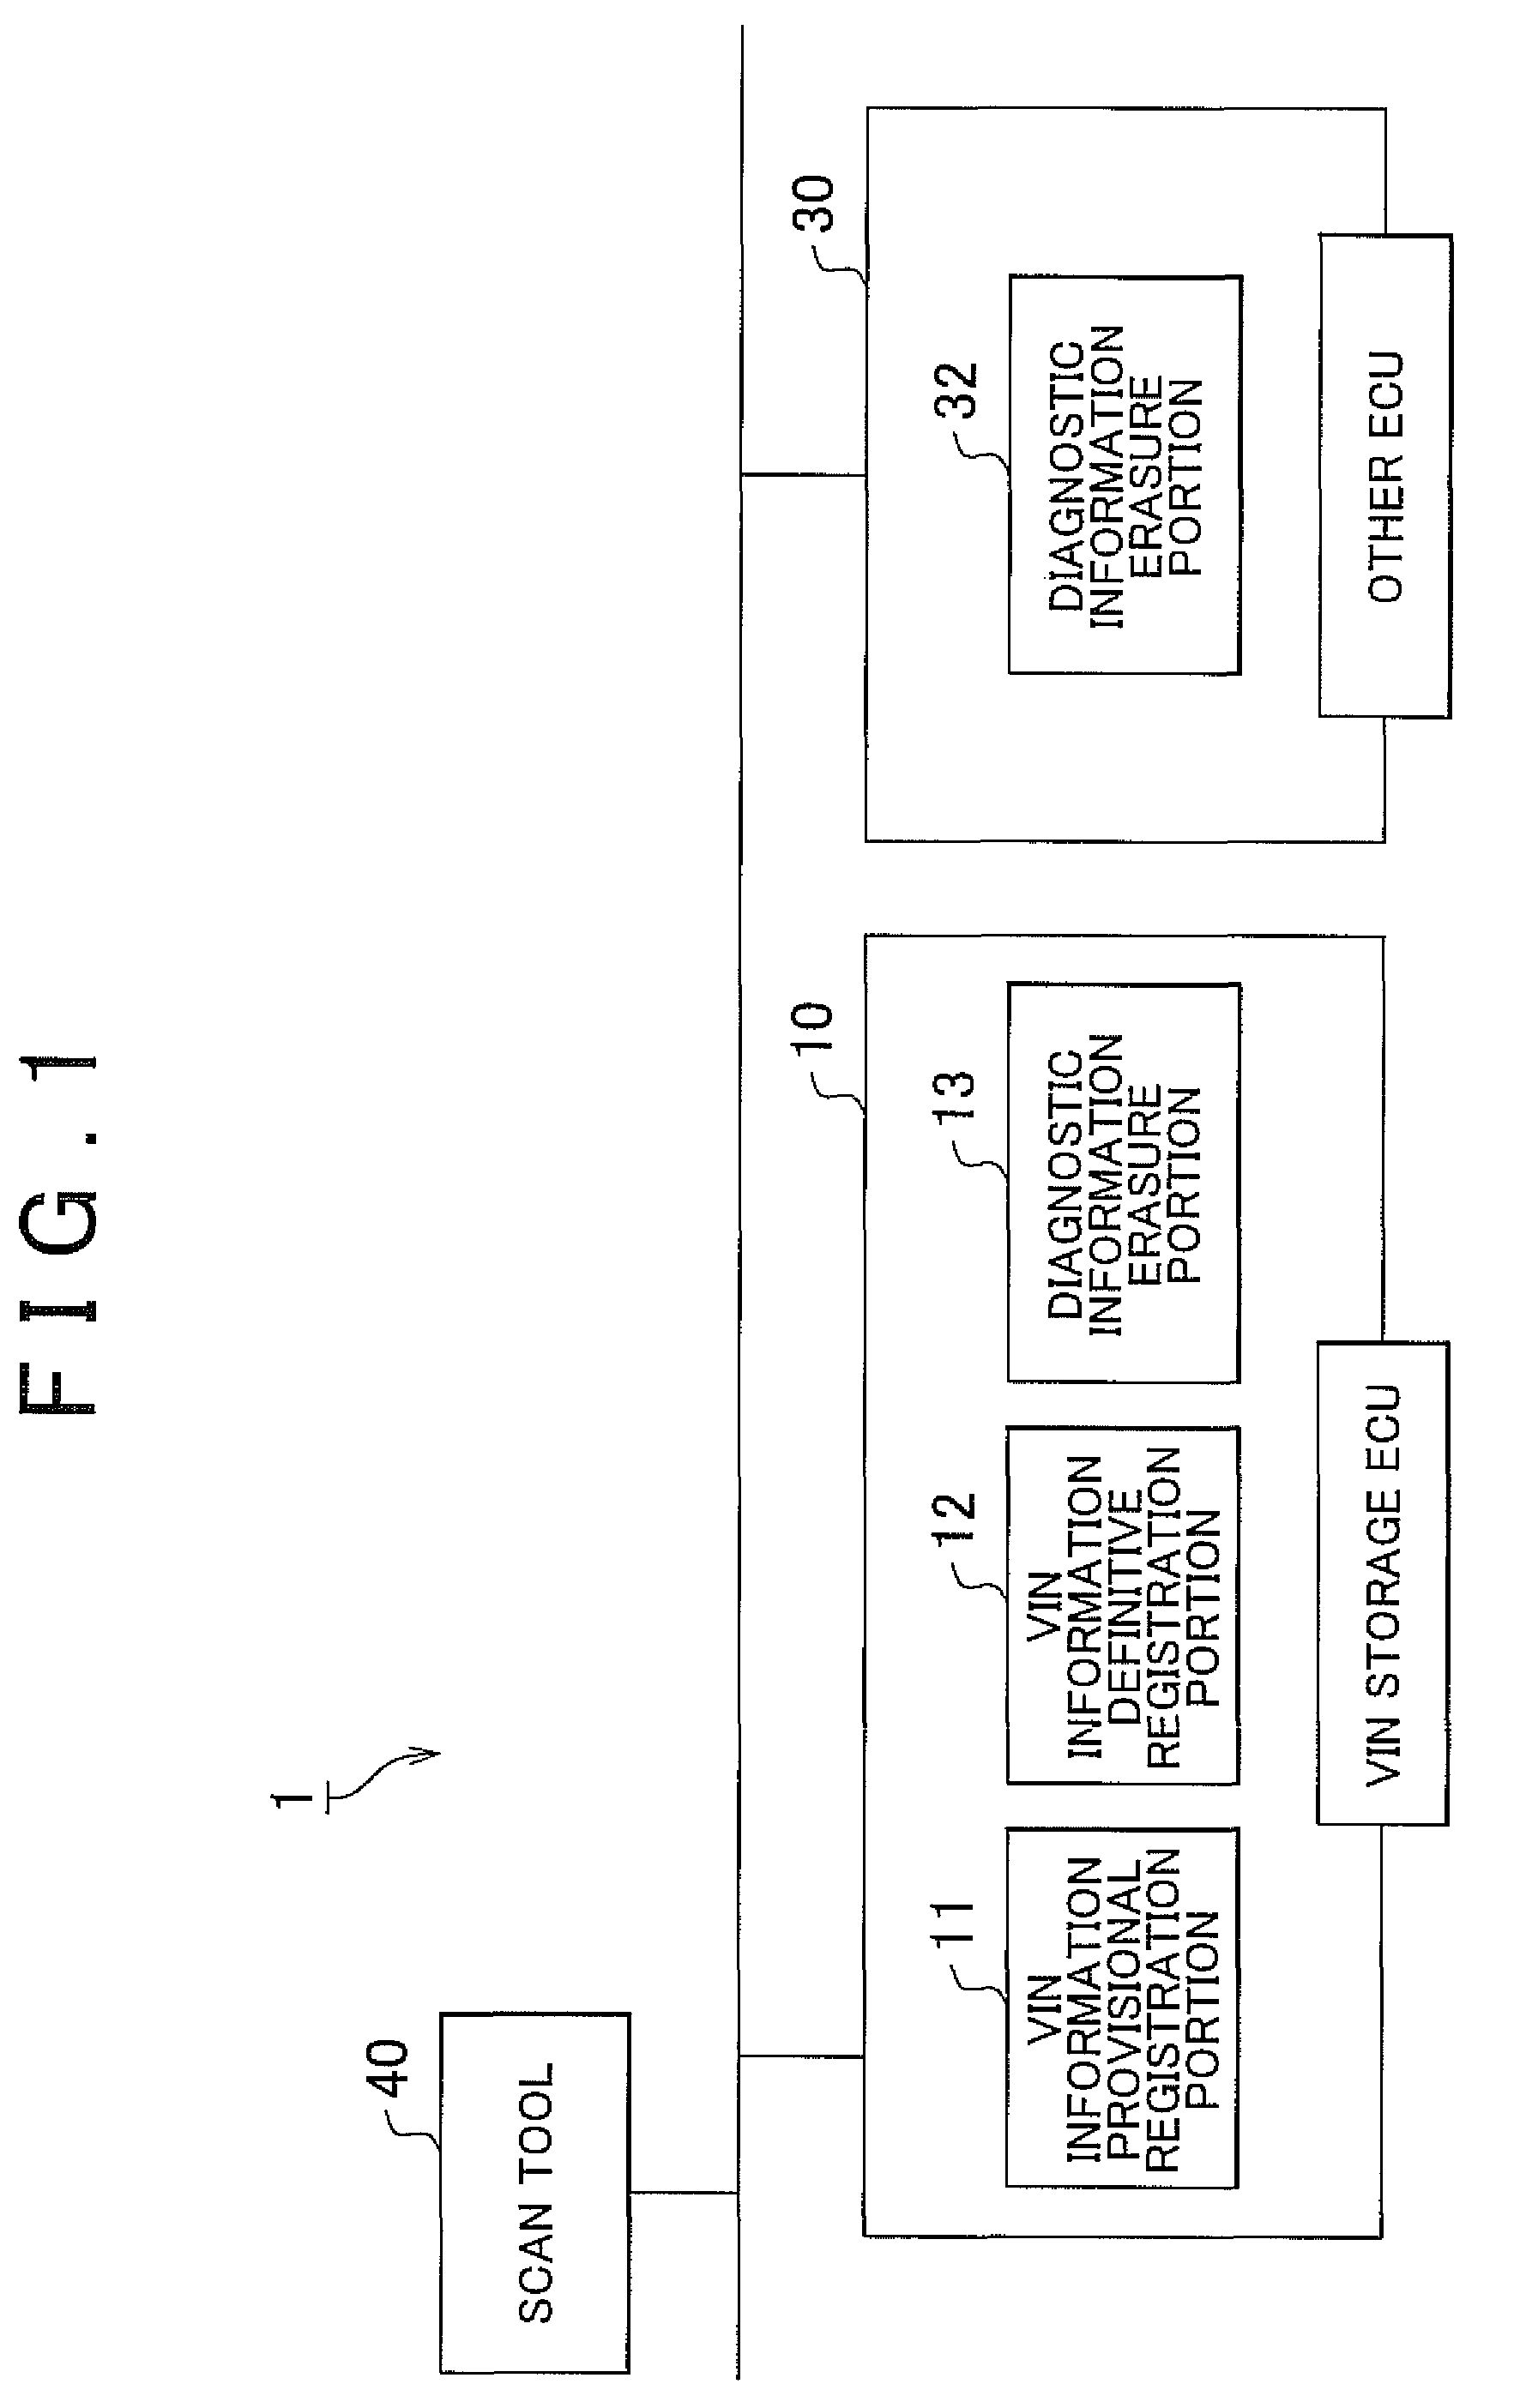 Failure diagnosis system, and vehicle-mounted ECU for use in the failure diagnosis system